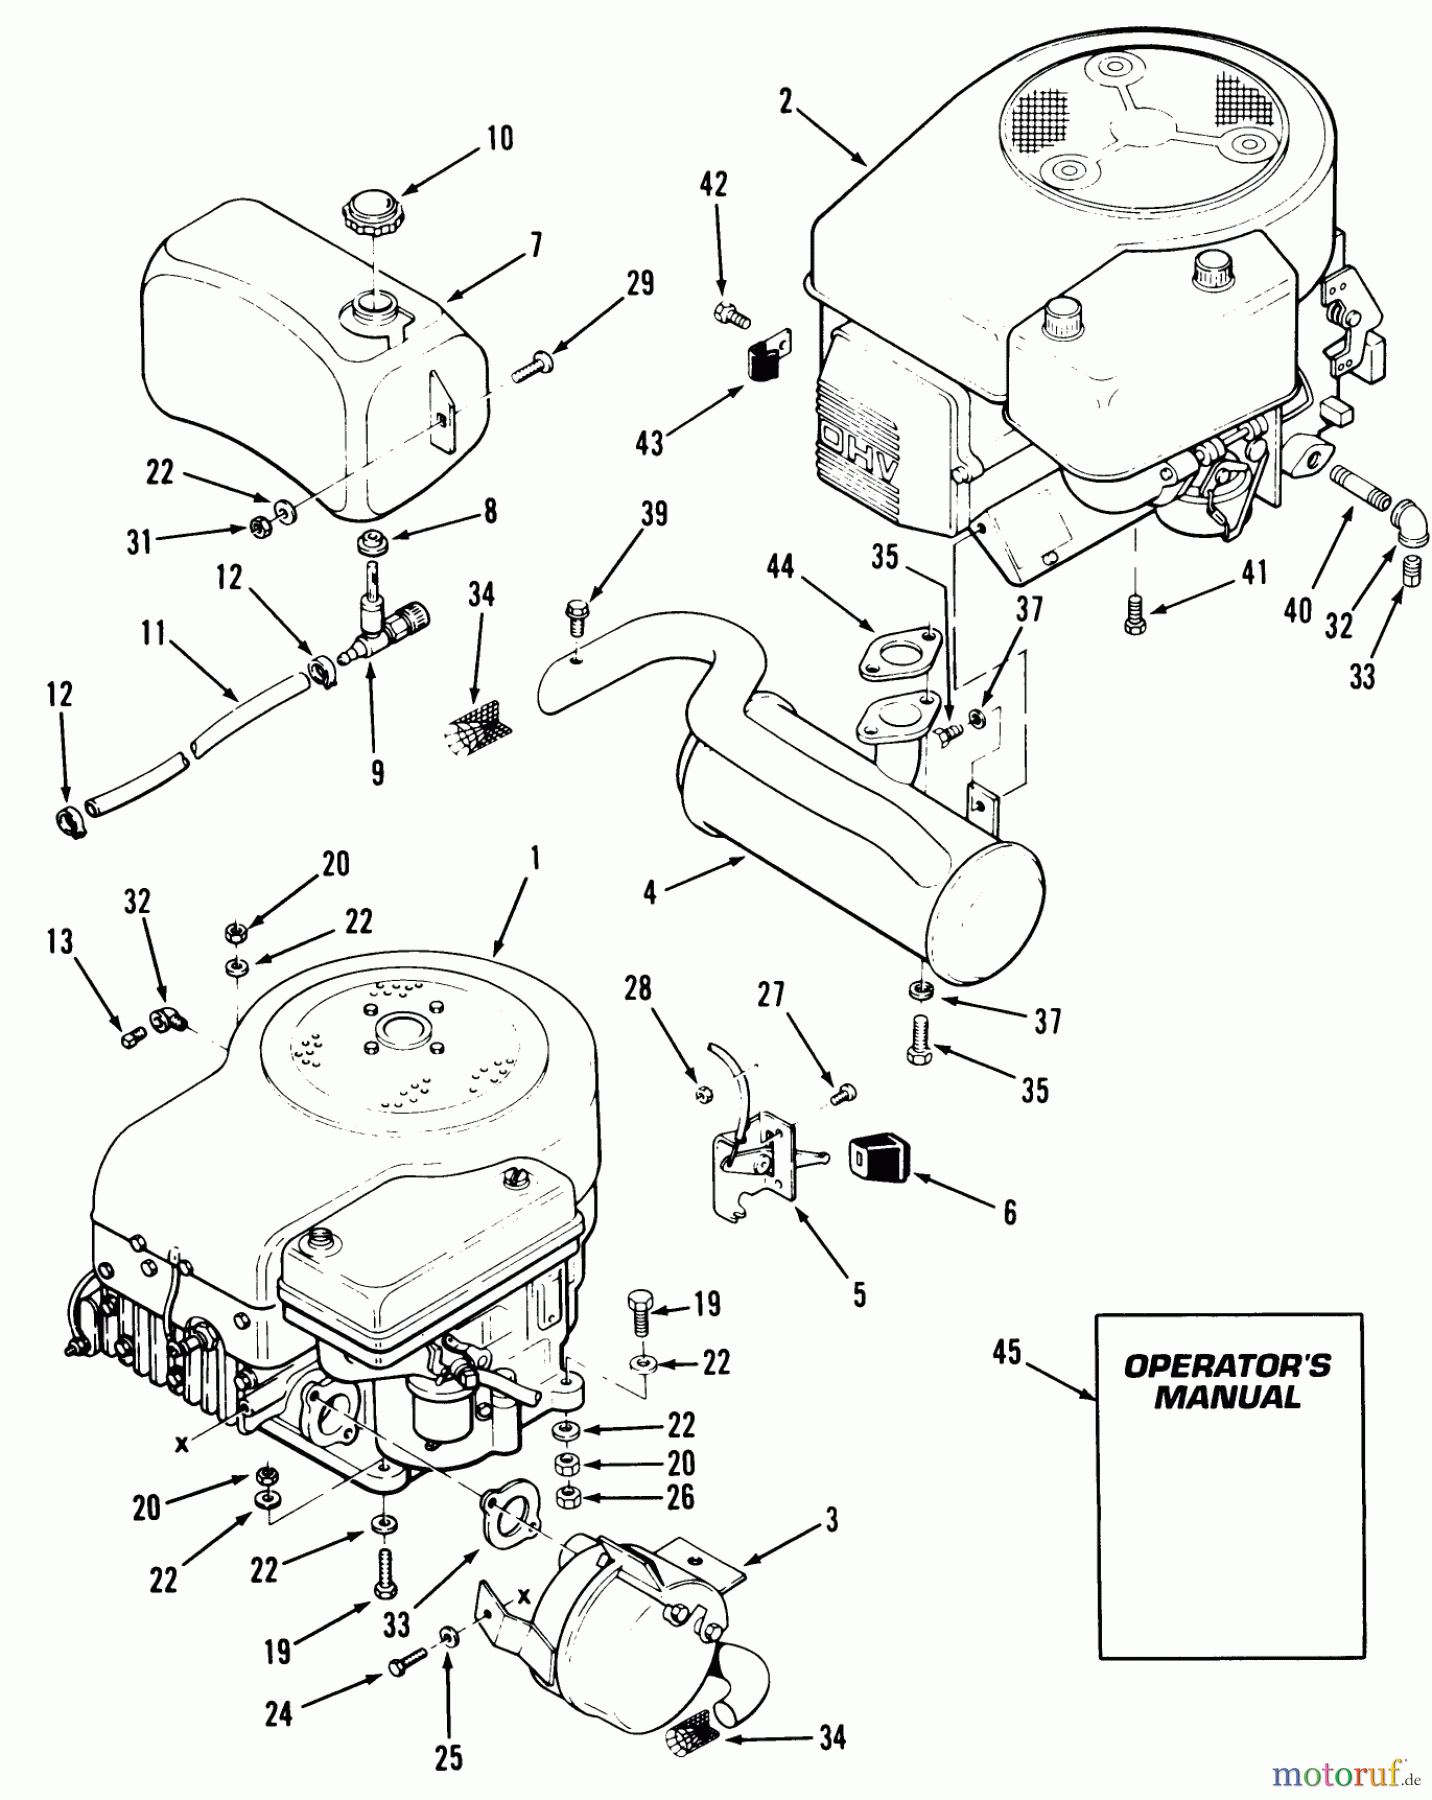  Toro Neu Mowers, Lawn & Garden Tractor Seite 1 32-12O503 (212-5) - Toro 212-5 Tractor, 1992 (2000001-2999999) ENGINE FUEL & EXHAUST ASSEMBLY